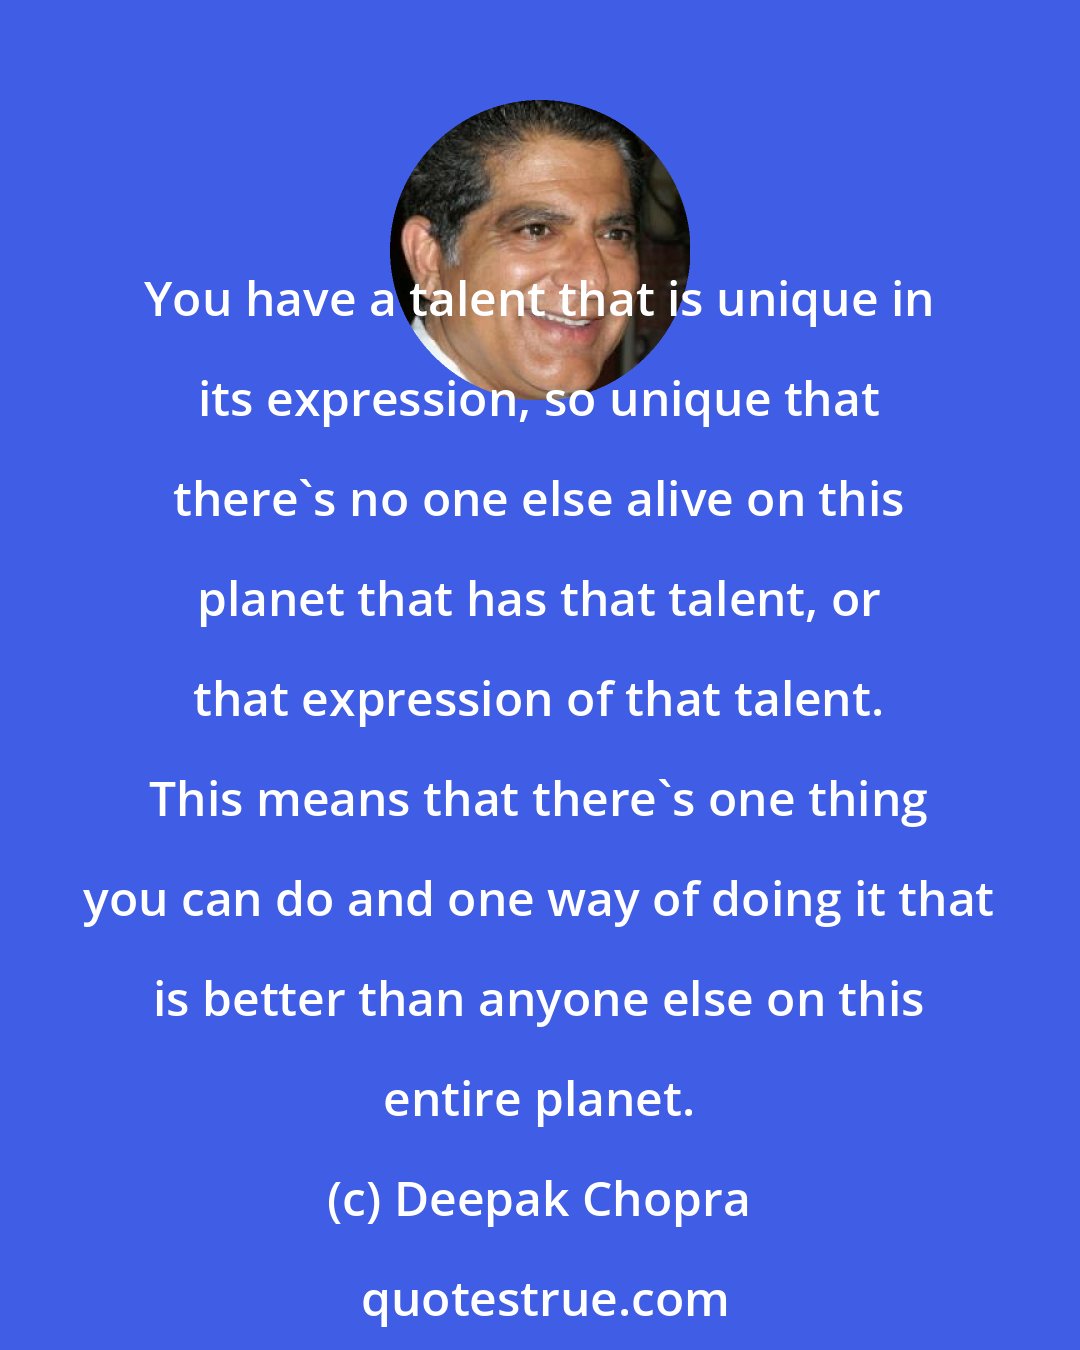 Deepak Chopra: You have a talent that is unique in its expression, so unique that there's no one else alive on this planet that has that talent, or that expression of that talent. This means that there's one thing you can do and one way of doing it that is better than anyone else on this entire planet.